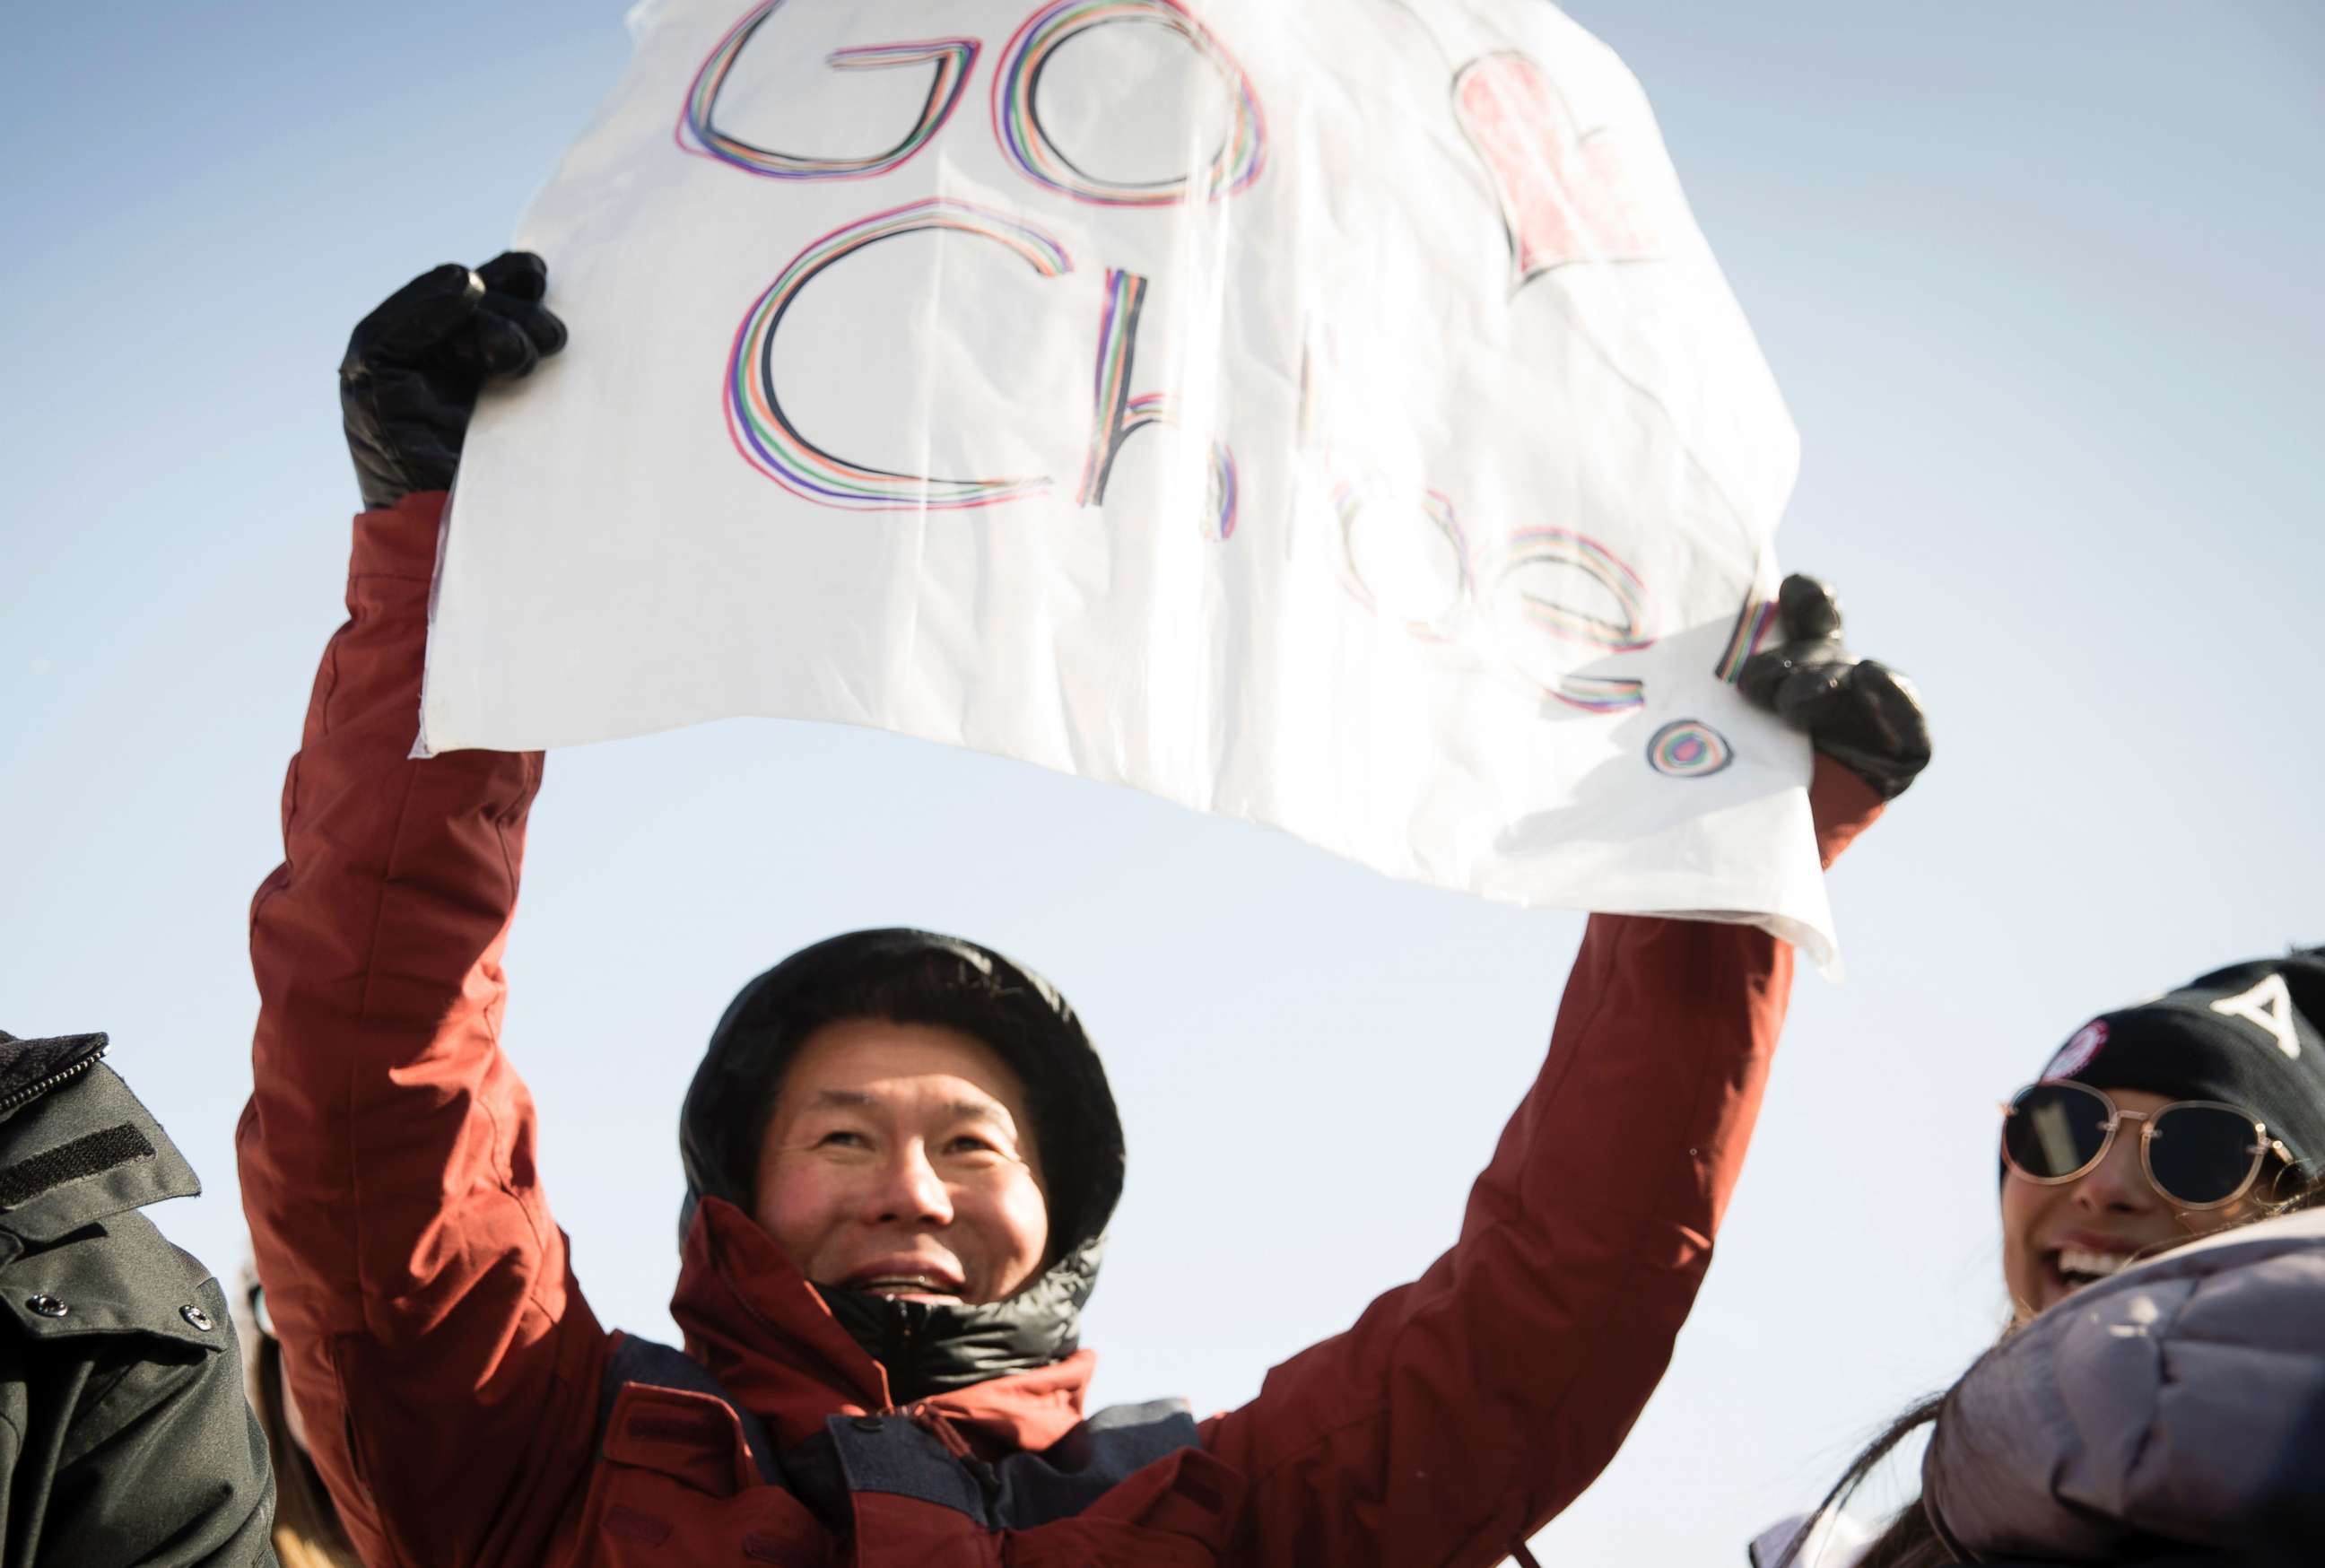 PHOTO: Jong Jin Kim, the father of U.S. snowboarder Chloe Kim, cheering as he watches her compete in the women's halfpipe final, Feb. 13, 2018. 